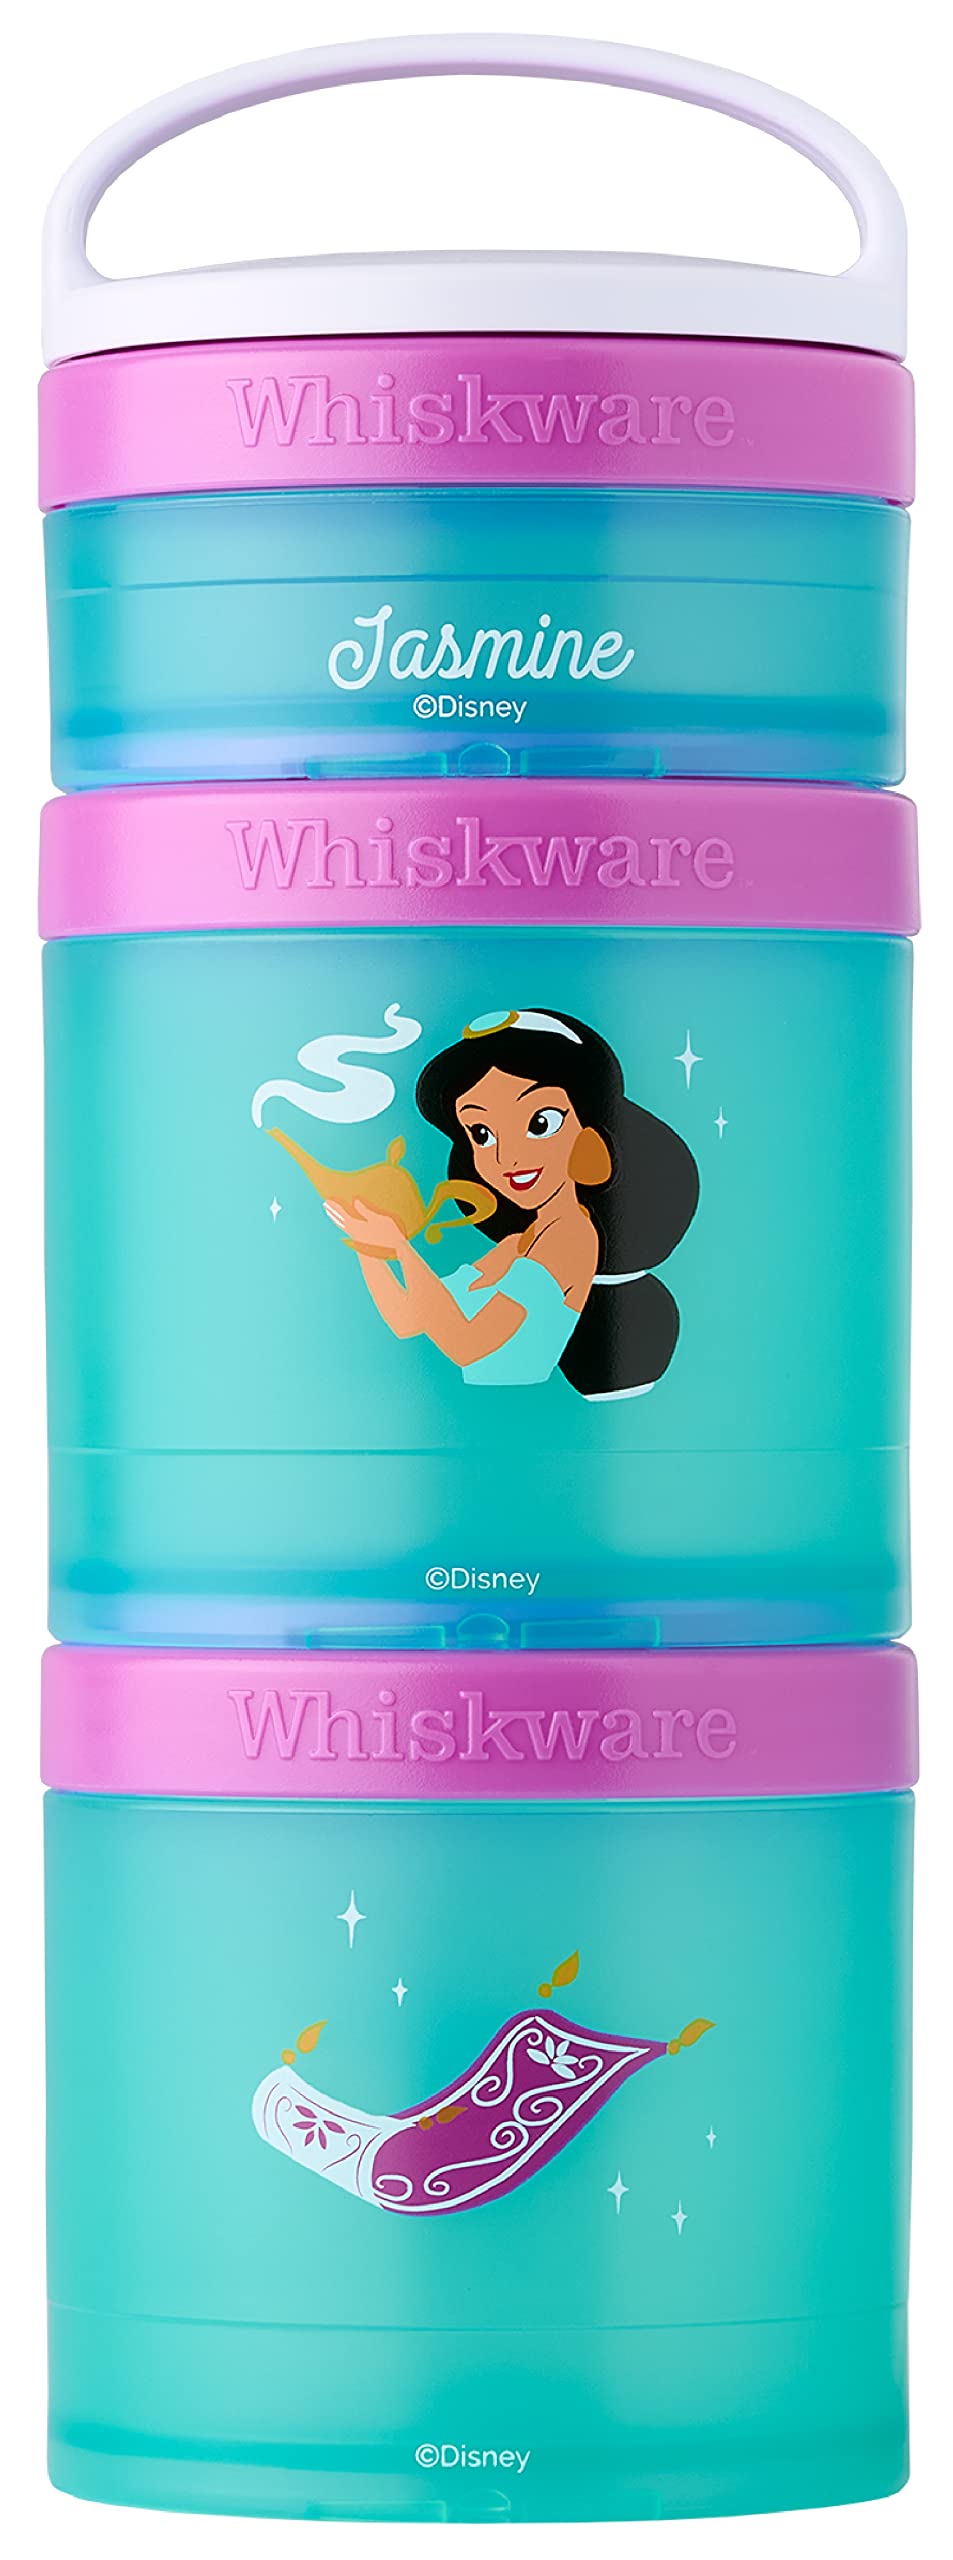 Whiskware Bluey Stackable Snack Containers for Kids and Toddlers, 3 Stackable Snack Cups for School and Travel, Bluey and Bingo, Let’s Do This!